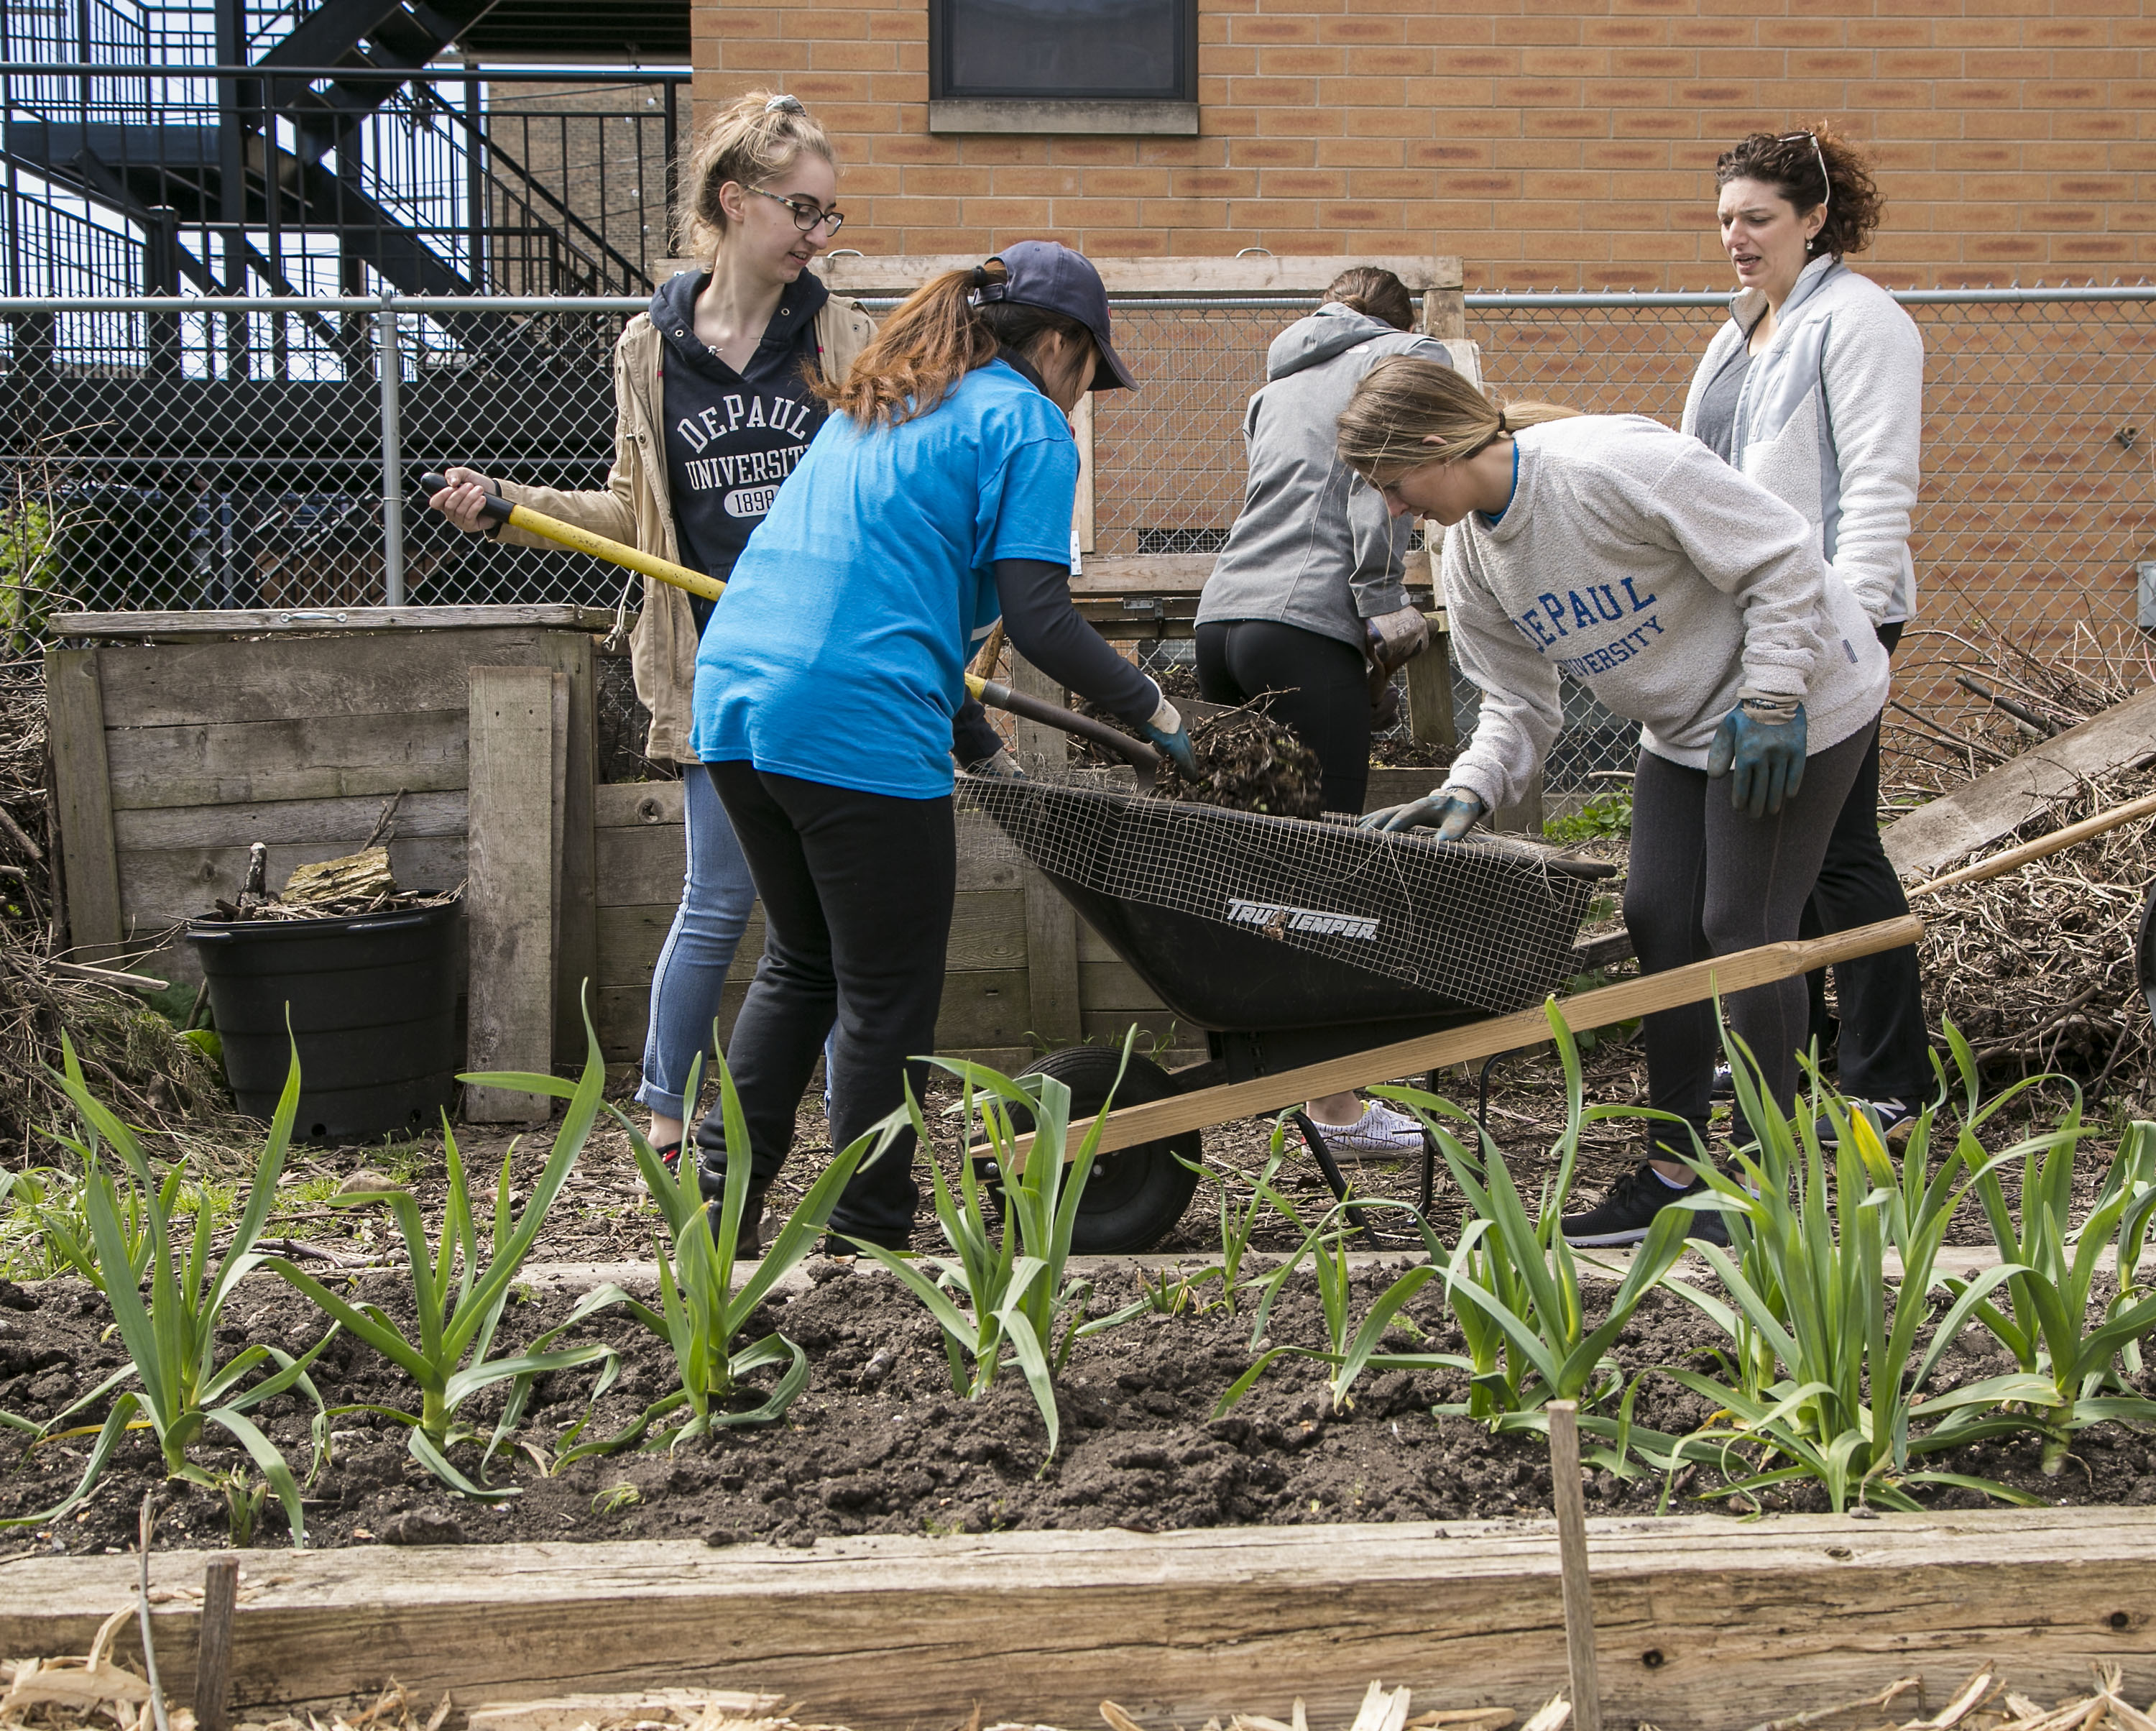 DePaul students participating in Vincentian Service Day